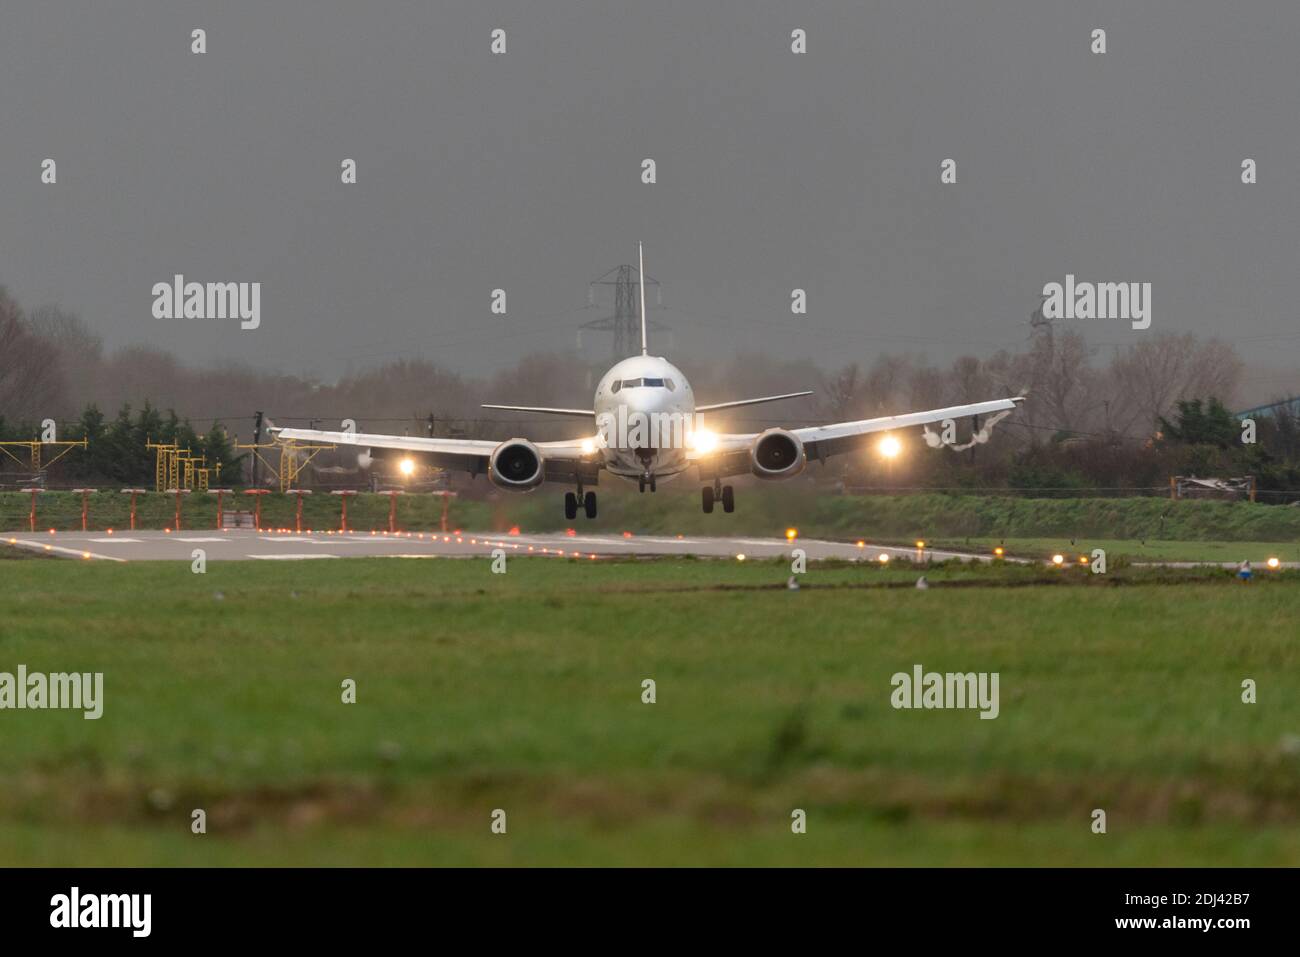 ASL Airlines Ireland Boeing 737 at London Southend Airport, Essex, UK, on cold and wet December day. Crosswind landing with condensation streamers Stock Photo